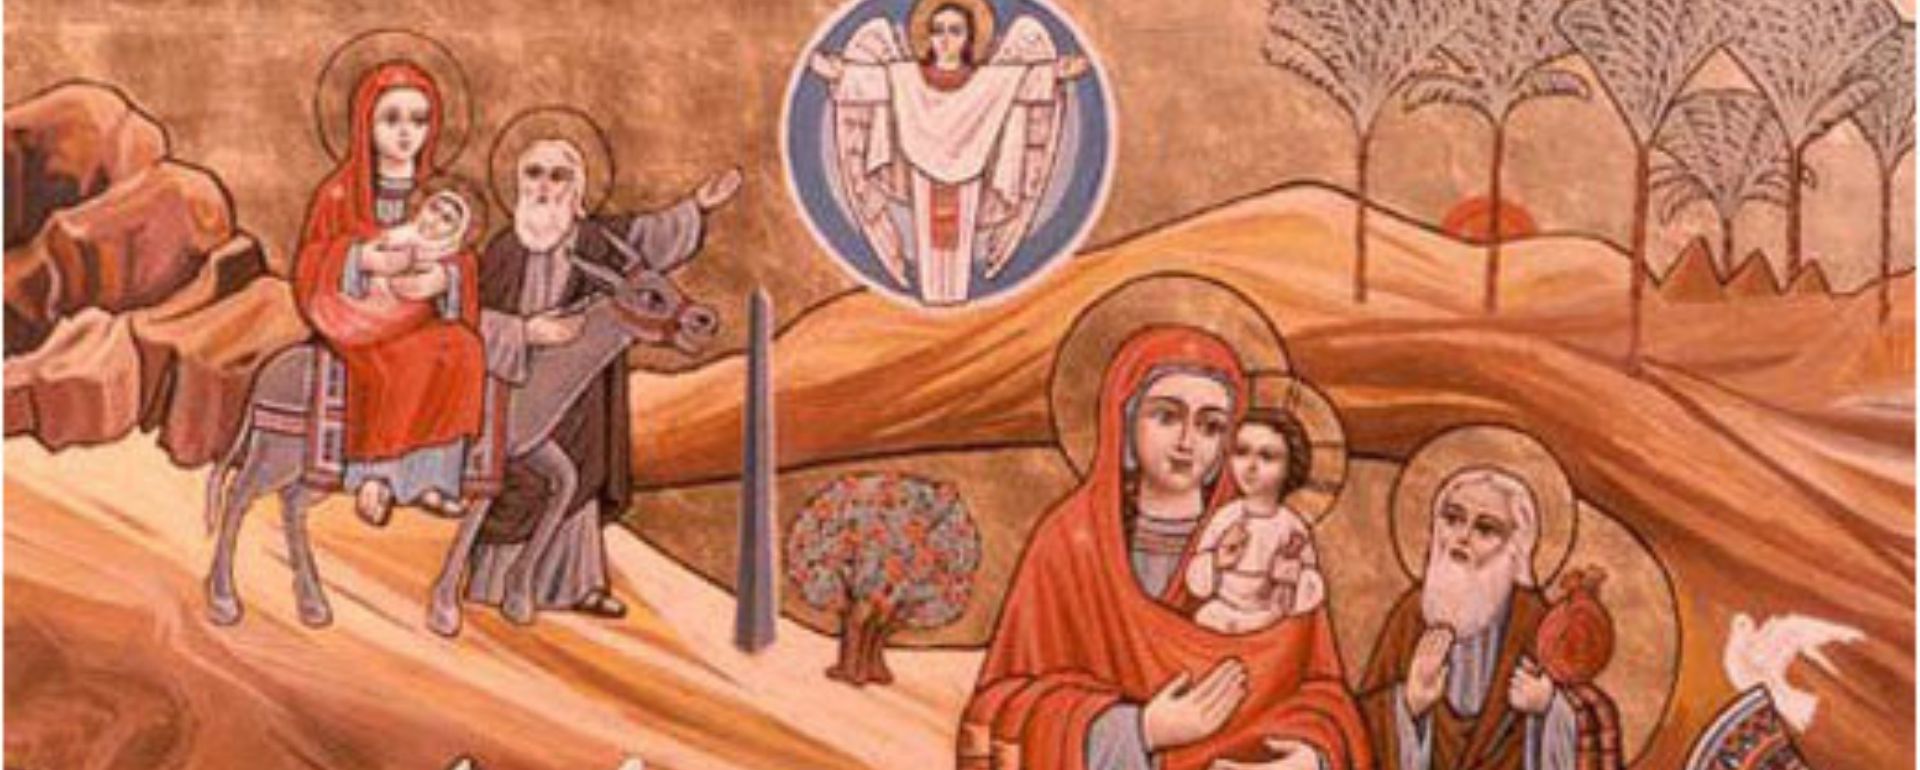 St. Joseph migrant with the Holy Family in Egypt